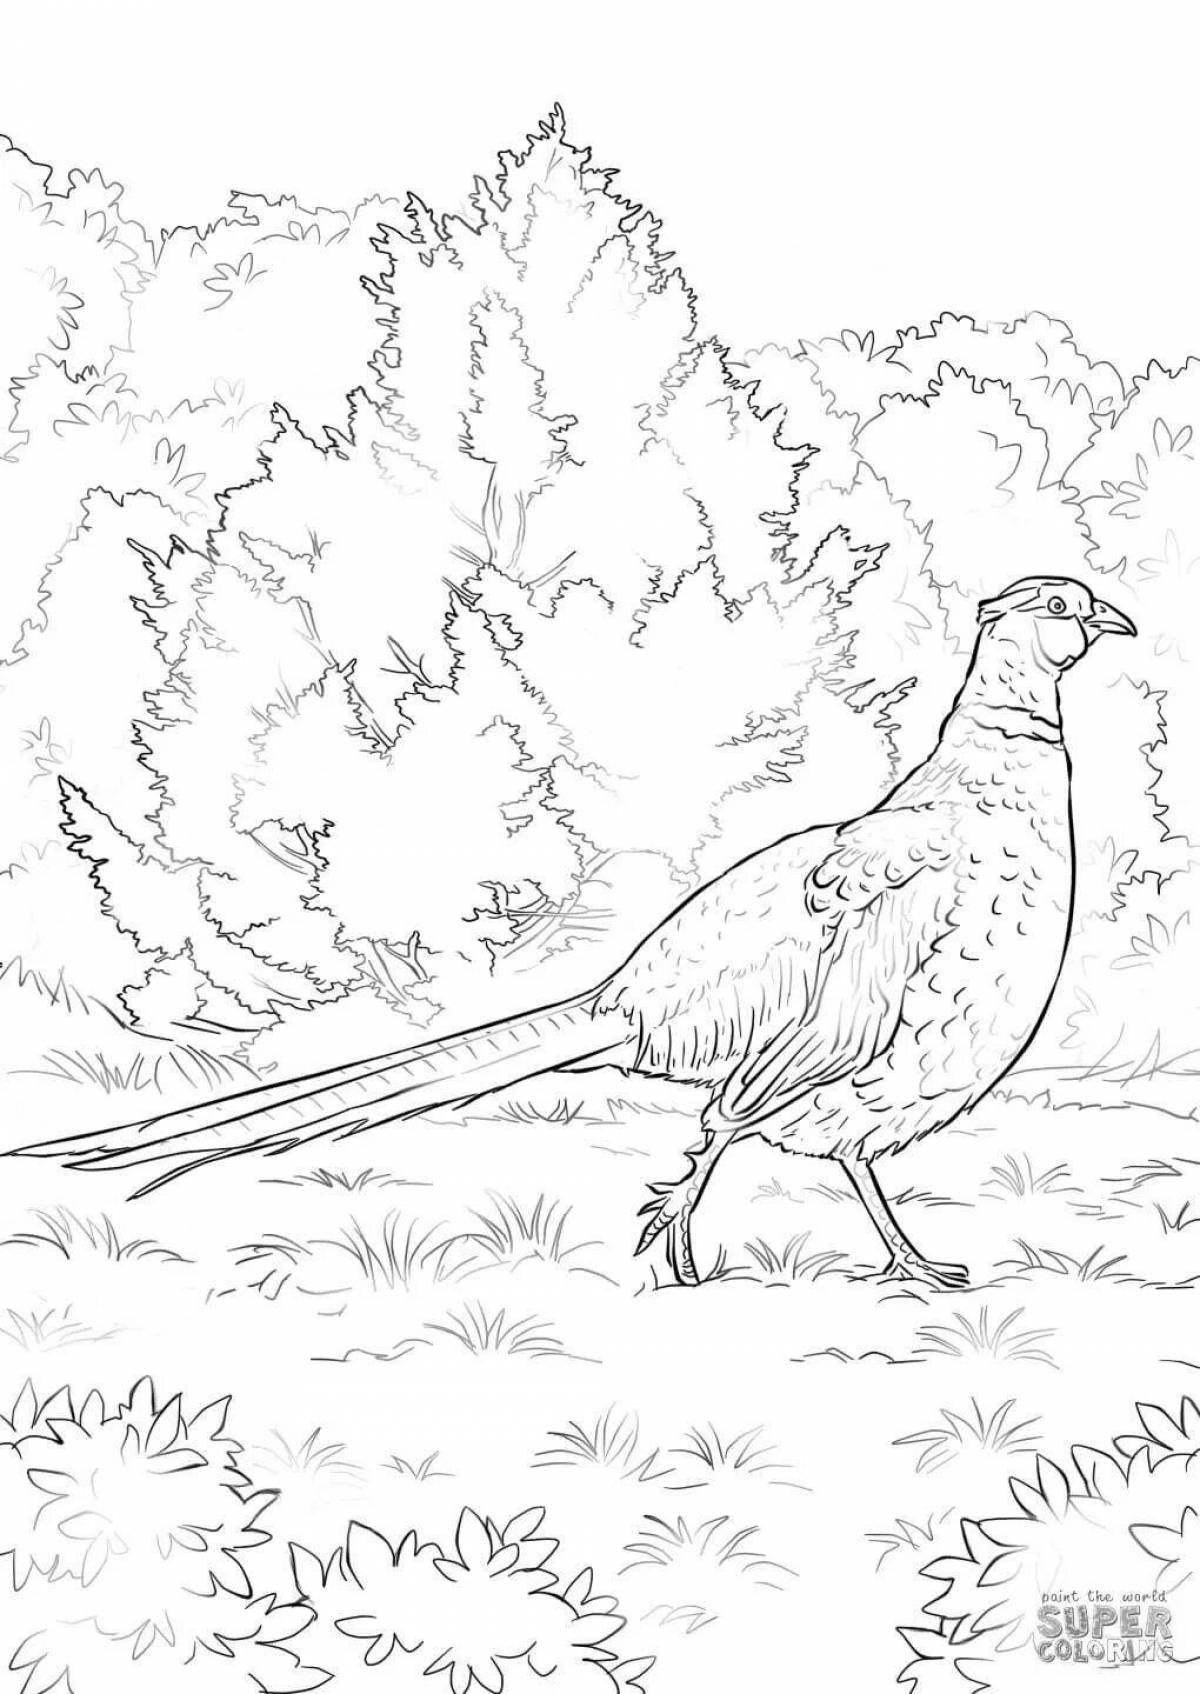 Amazing black grouse coloring page for kids